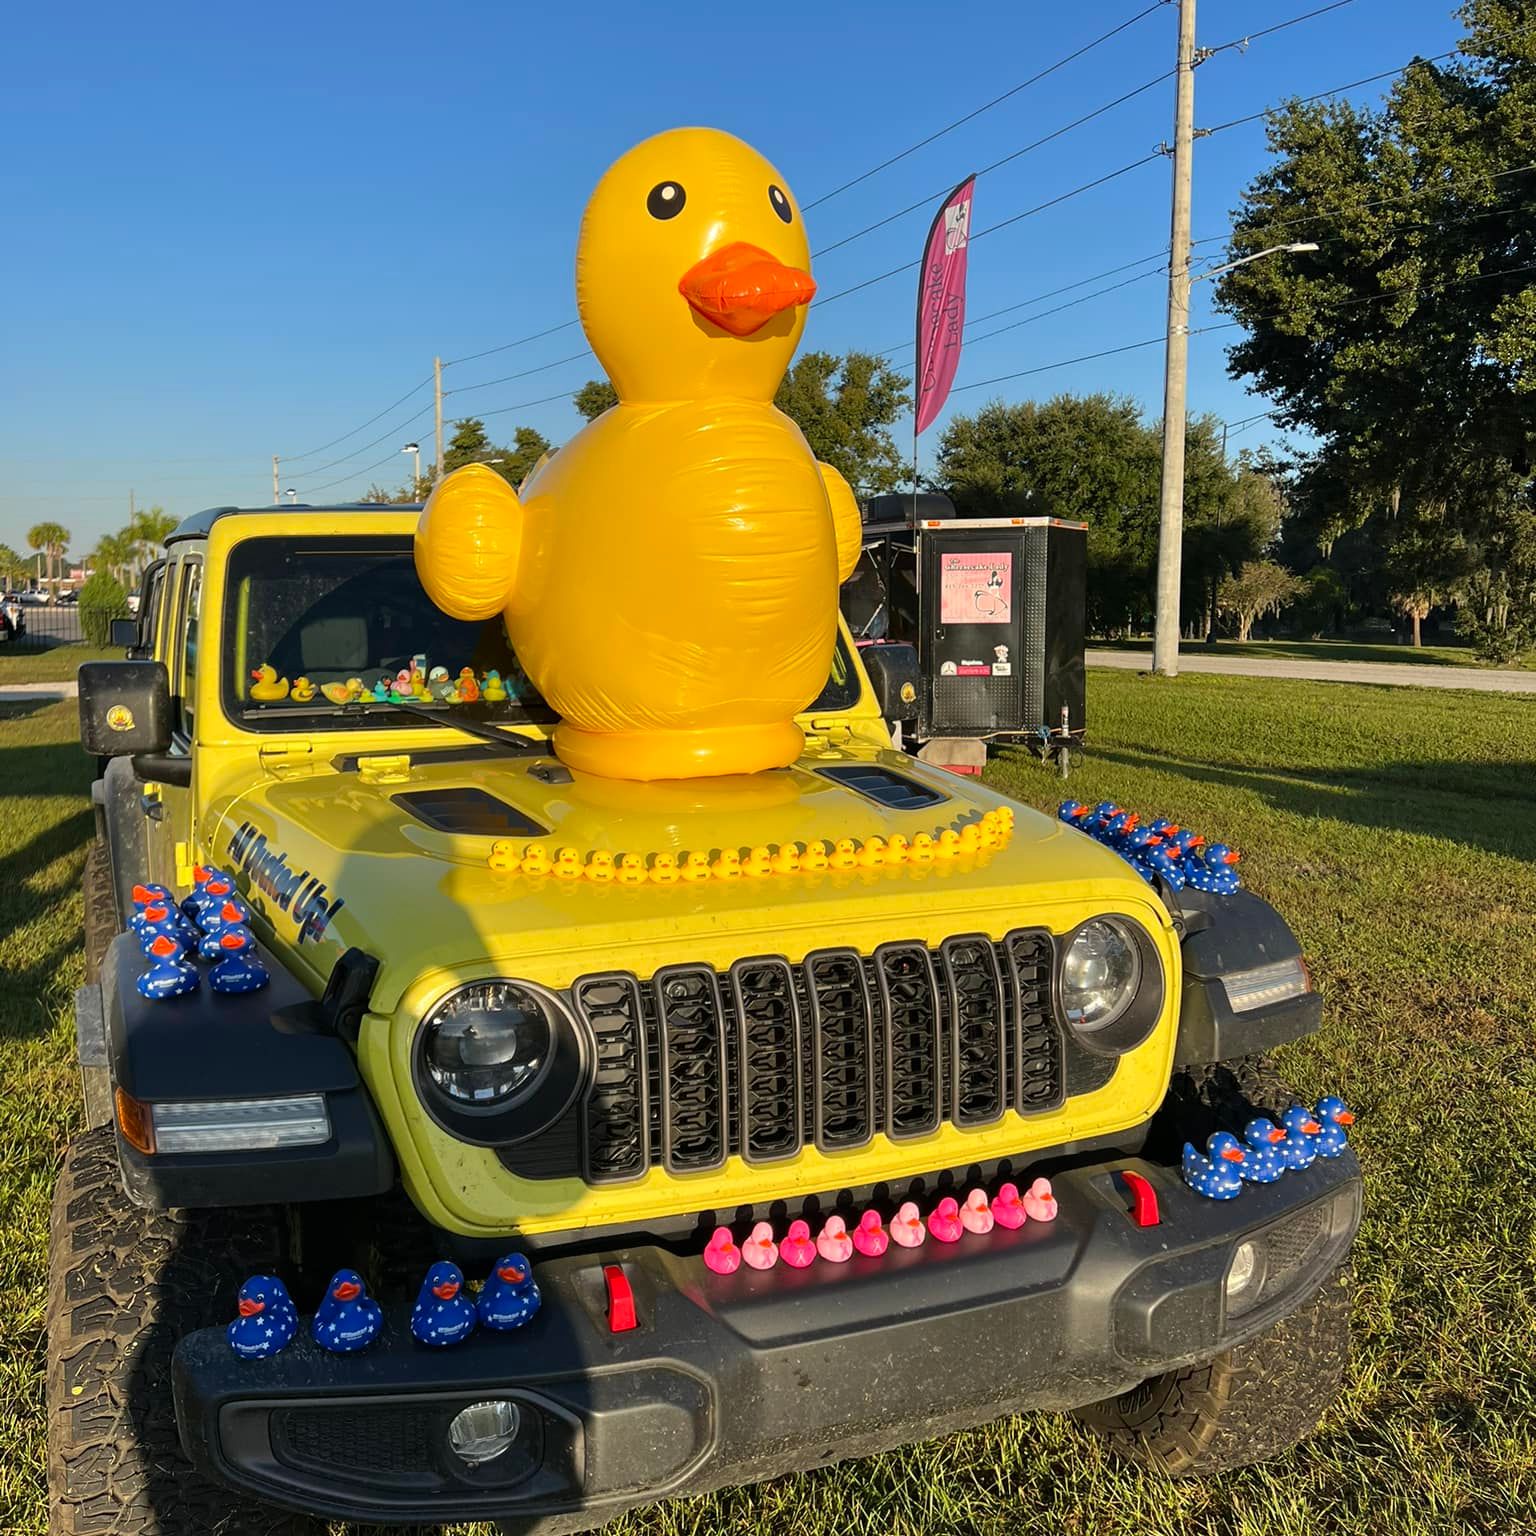 Allison Parliament (not pictured) had been the founder of the Duck Duck Jeep movement